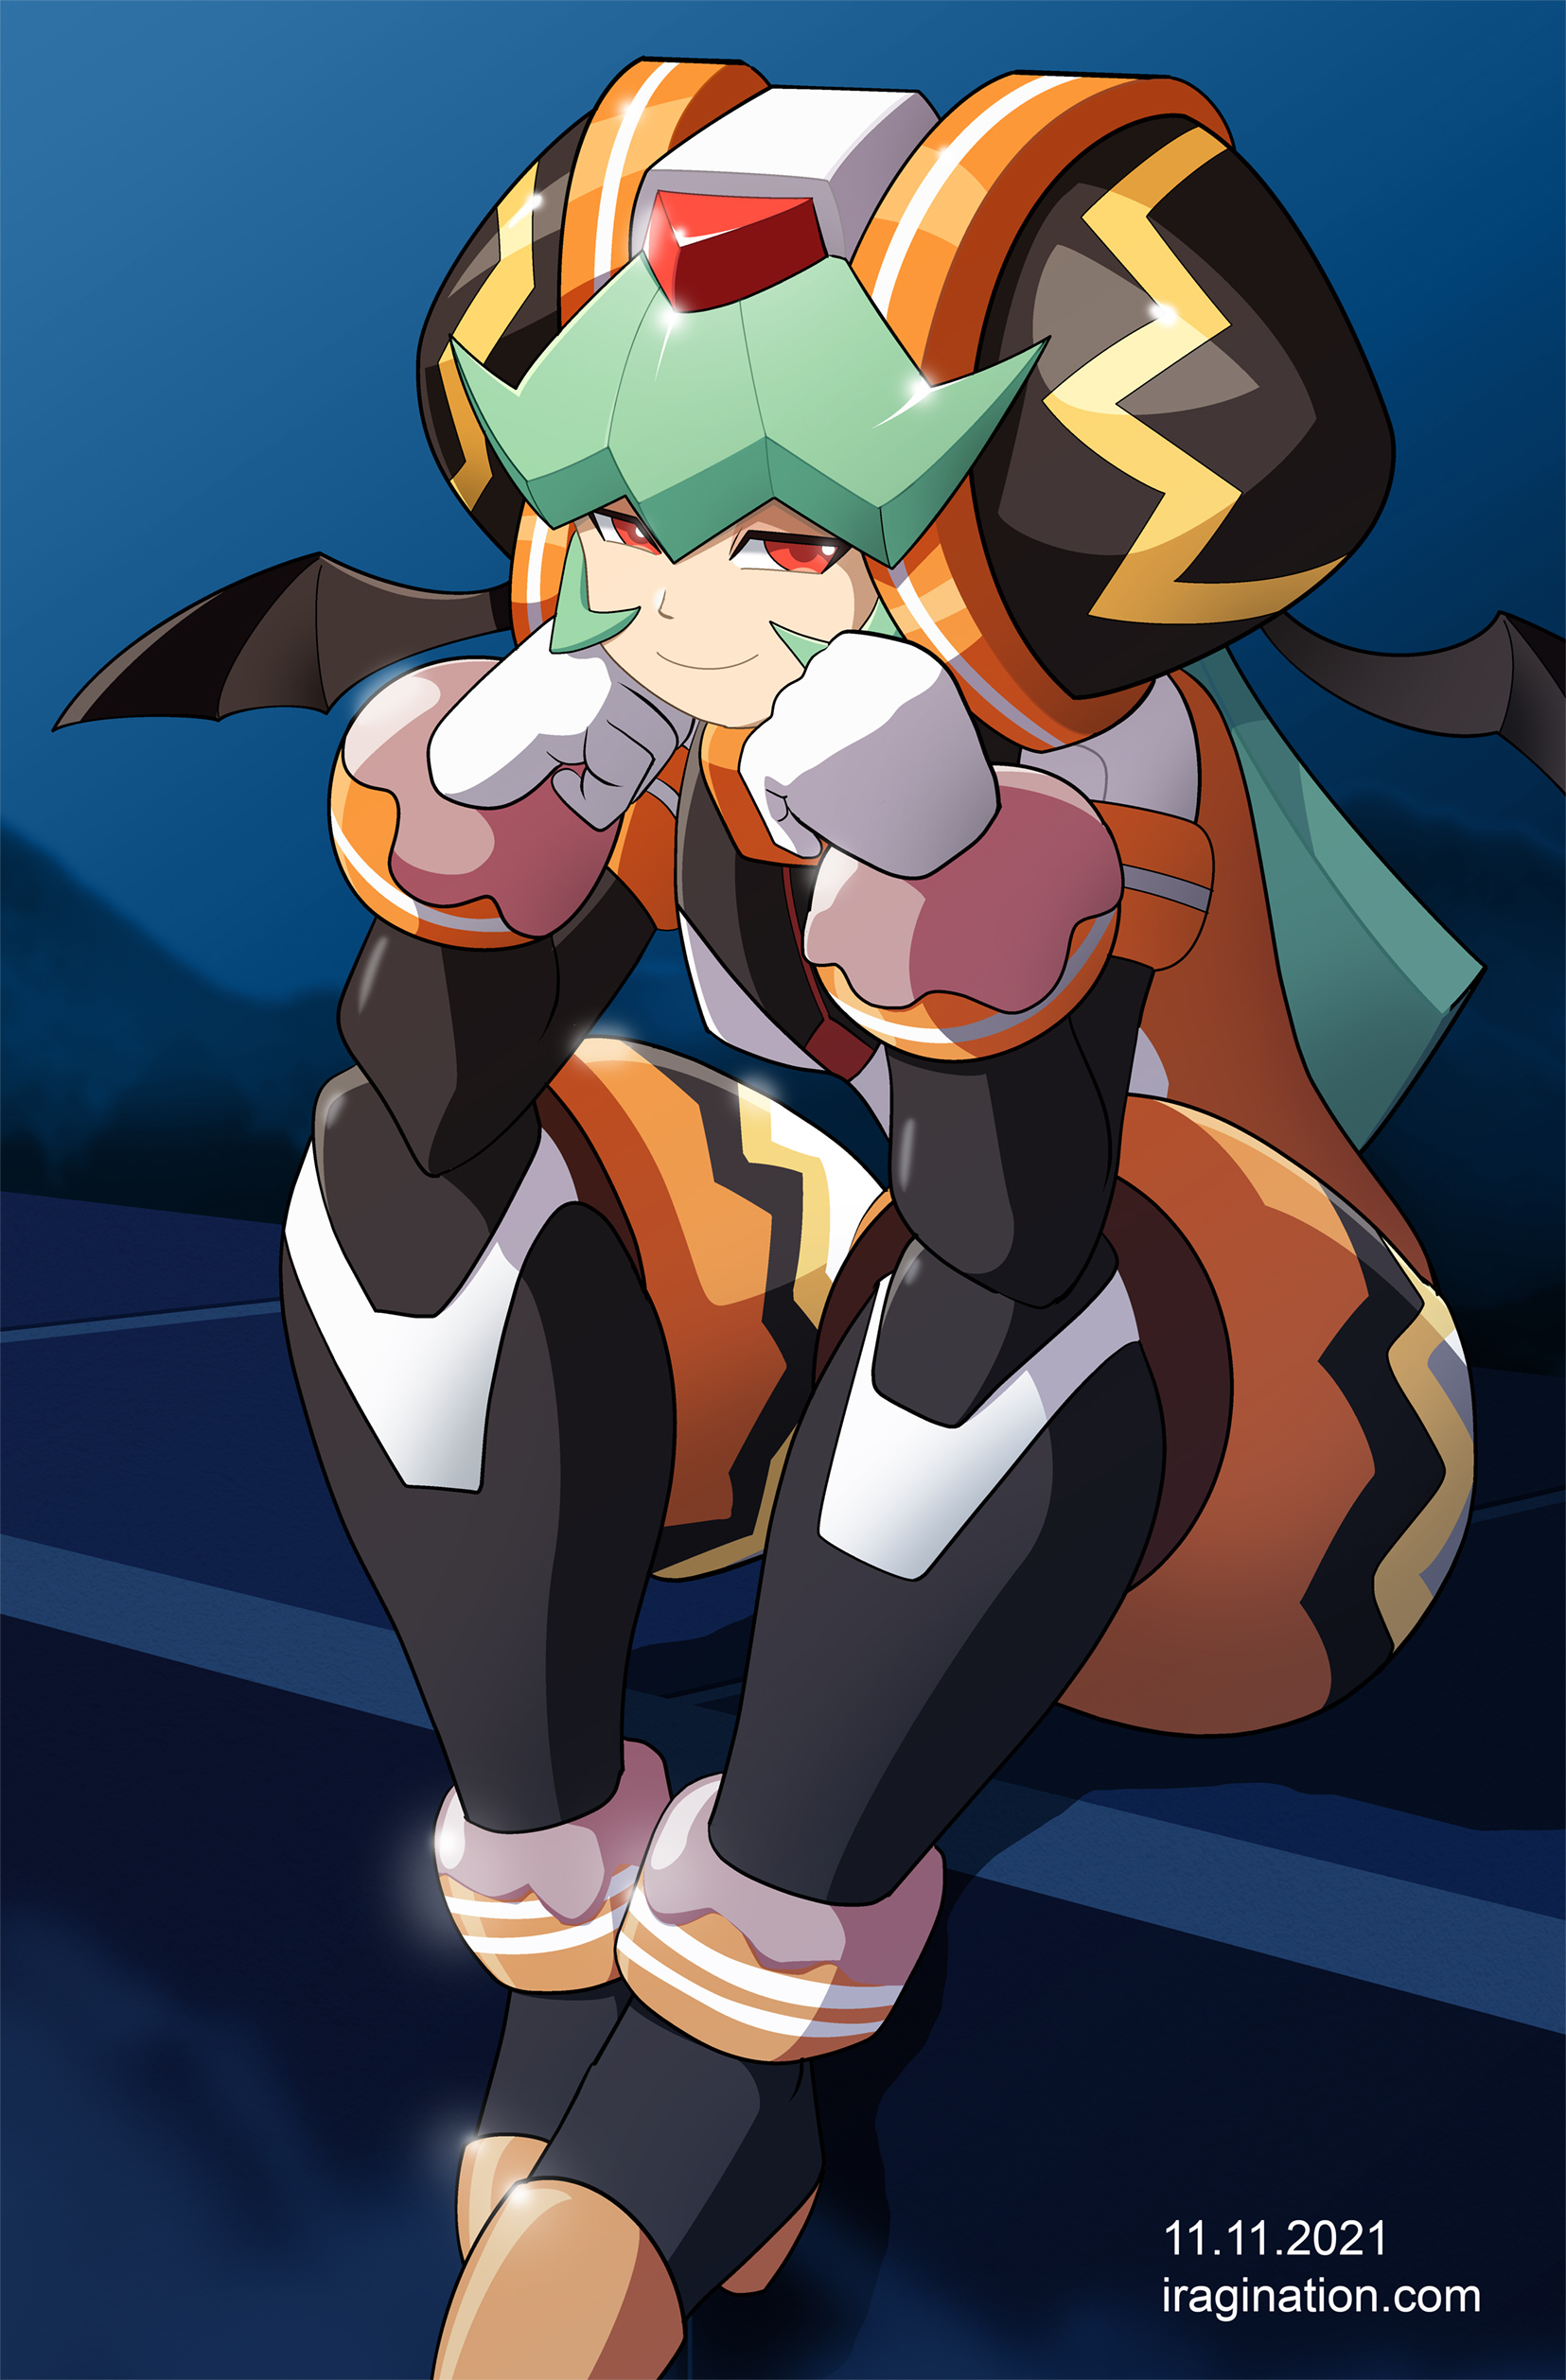 Halloween Pandora - Rockman X DiVE
Here’s [url=https://www.facebook.com/CAPCOM.RXD/posts/848017009227723]Halloween Pandora[/url] from the 2021 Rockman X DiVE Halloween Event.

I don’t think I have drawn Pandora before. I shied away because these helmets are rather difficult to get right. Kind of the same problem when trying to draw [url=https://www.iragination.com/illust/displayimage.php?pid=318]Isoc’s[/url] helmet. 

And apparently having her smile is kind of a big deal (not sure why; she giggles a lot in-game), so there you go. The initial sketch came up kind of nice, so I decided to color it.

[b]Blog post[/b]
Pandora is boss character from the Mega Man ZX/ZX Advent games, which released around 2006/2007. I did not have the opportunity to play those games at all. I consider them at the tail end of the steady Mega Man game releases of that era. 

They were released exclusively for the Nintendo DS consoles, so you had to invest in that platform if you wanted to play them. Learning that the series ended in an unresolved cliffhanger did not help me to decide to pick it up either. It is only recently thanks to the [url=https://www.megaman-zzxlc.com/]Mega Man Zero/ZX collection[/url] that I could take a look to these games. Now I just don’t have time to play them, which I find hilarious. At least I caught up with the storyline.

Keywords: pandora